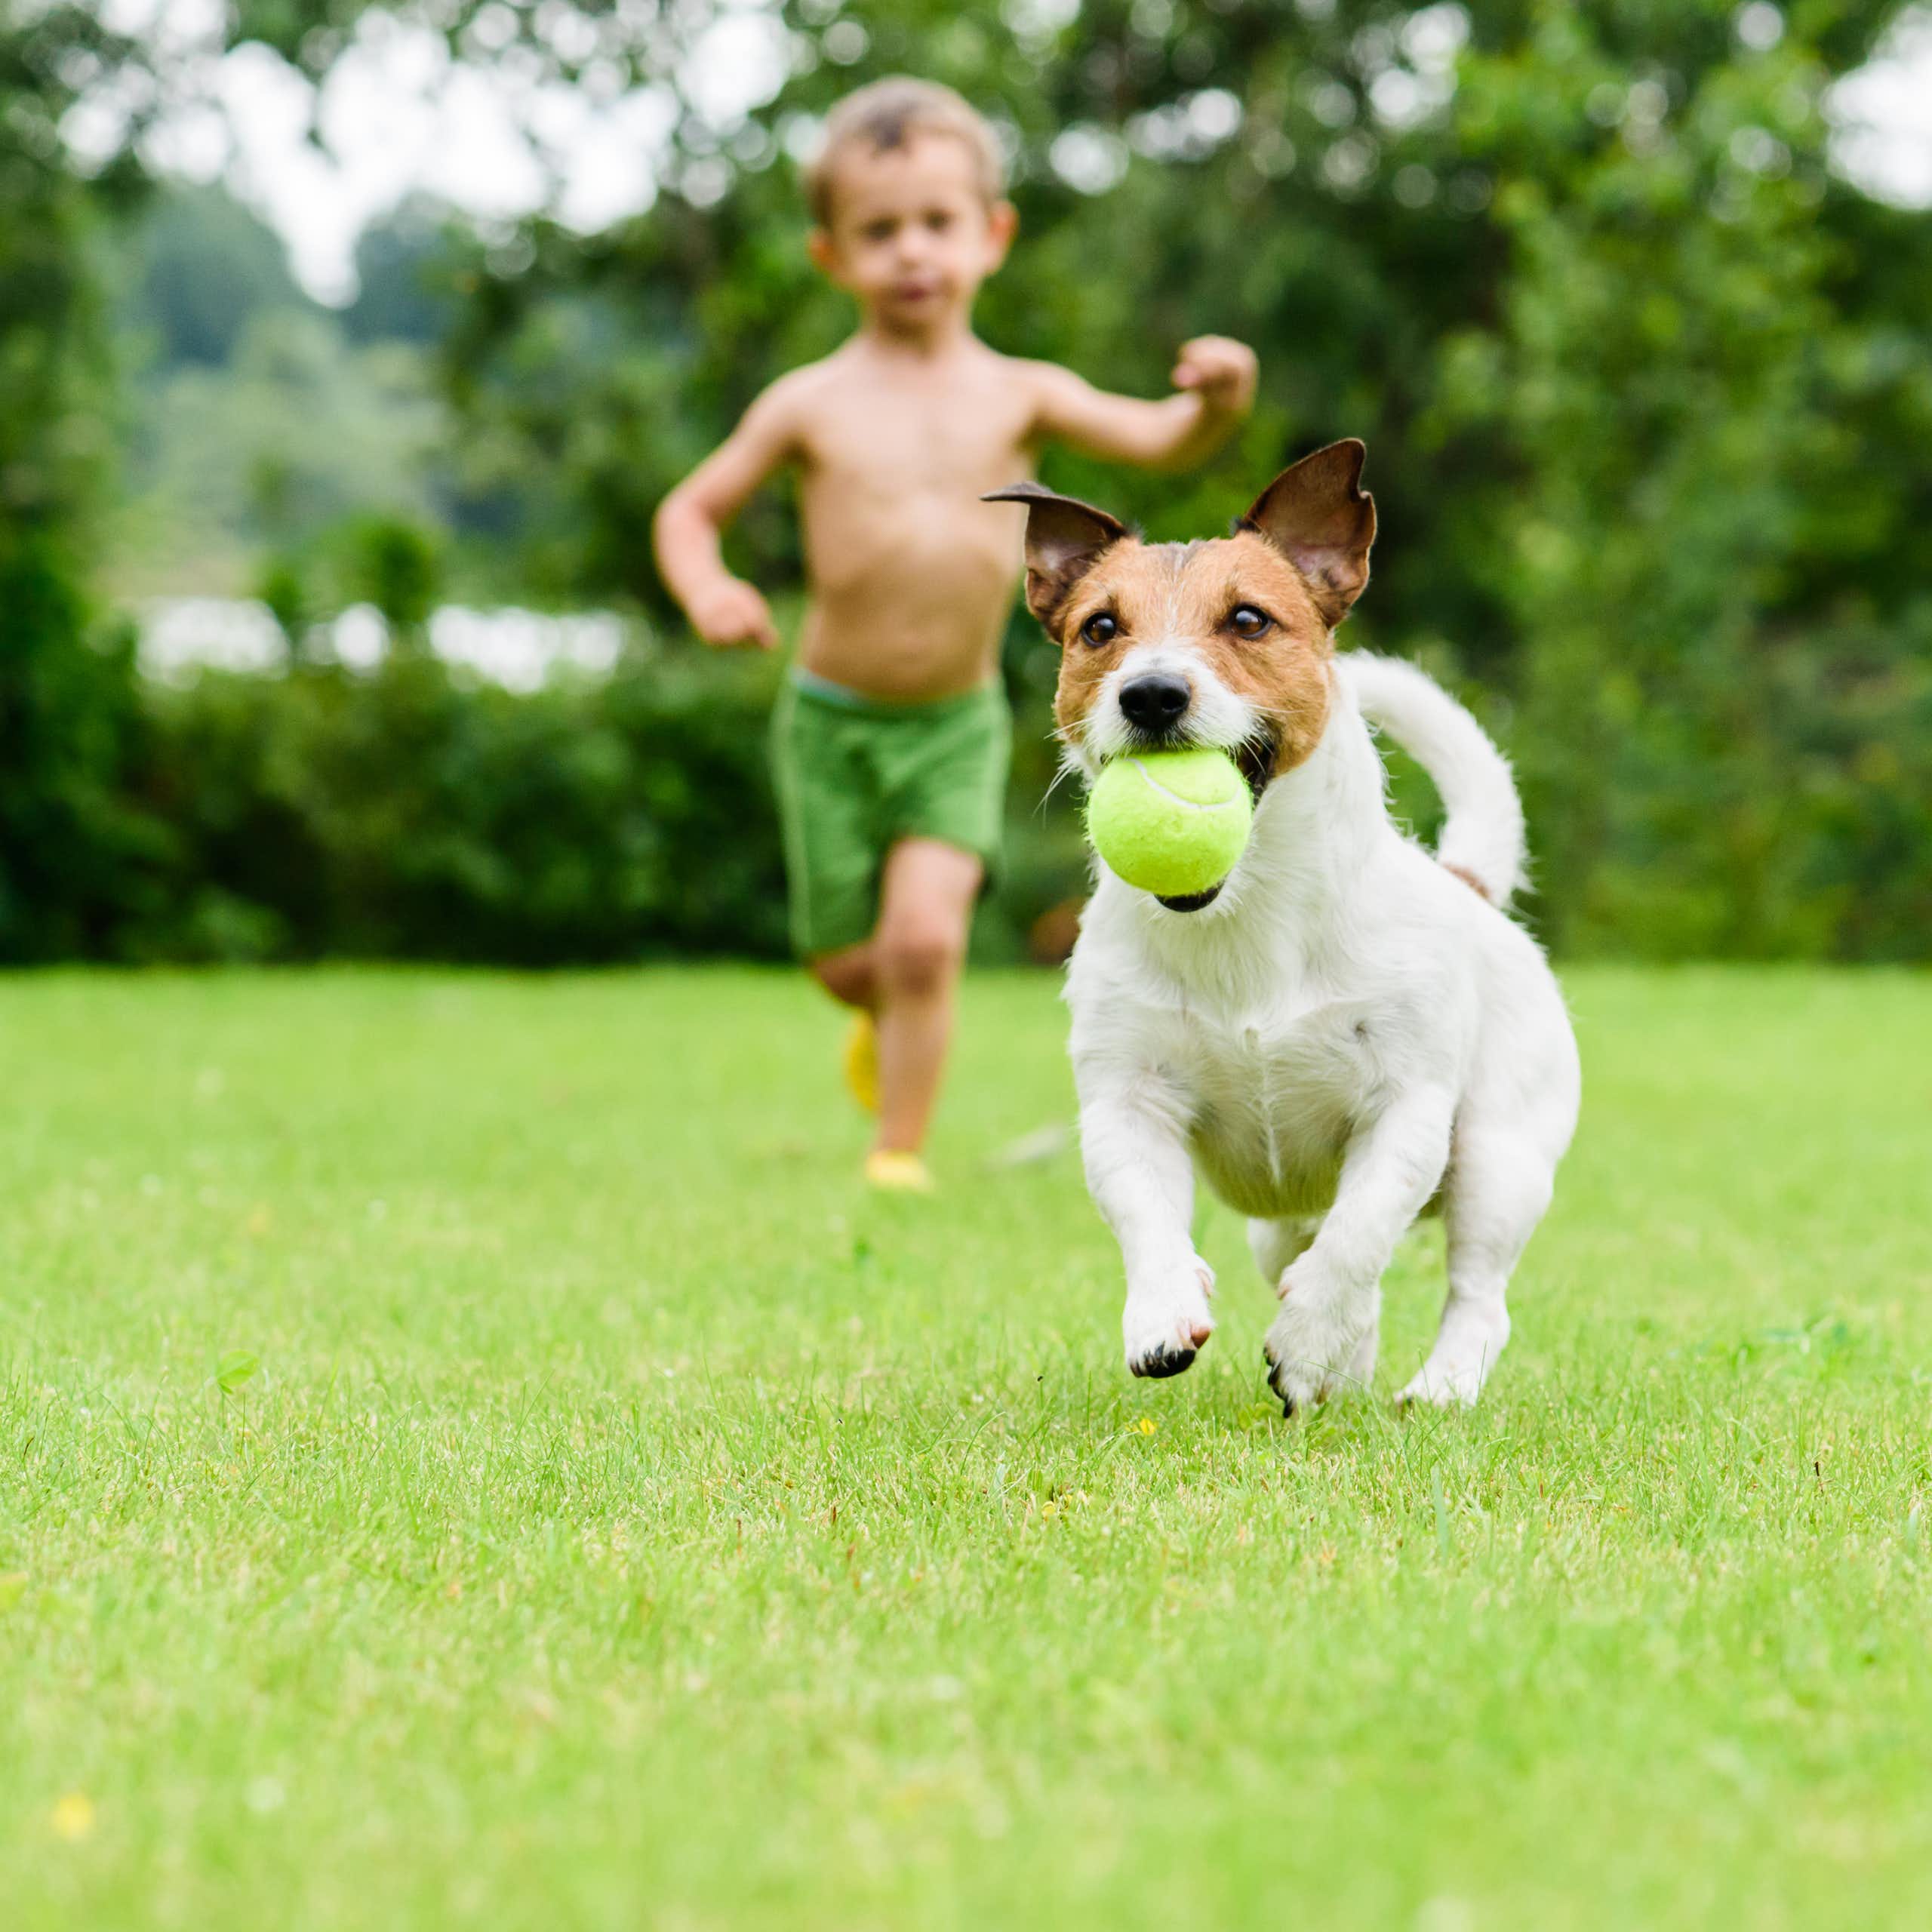 Dog running away with a ball in its mouth boy chasing in background